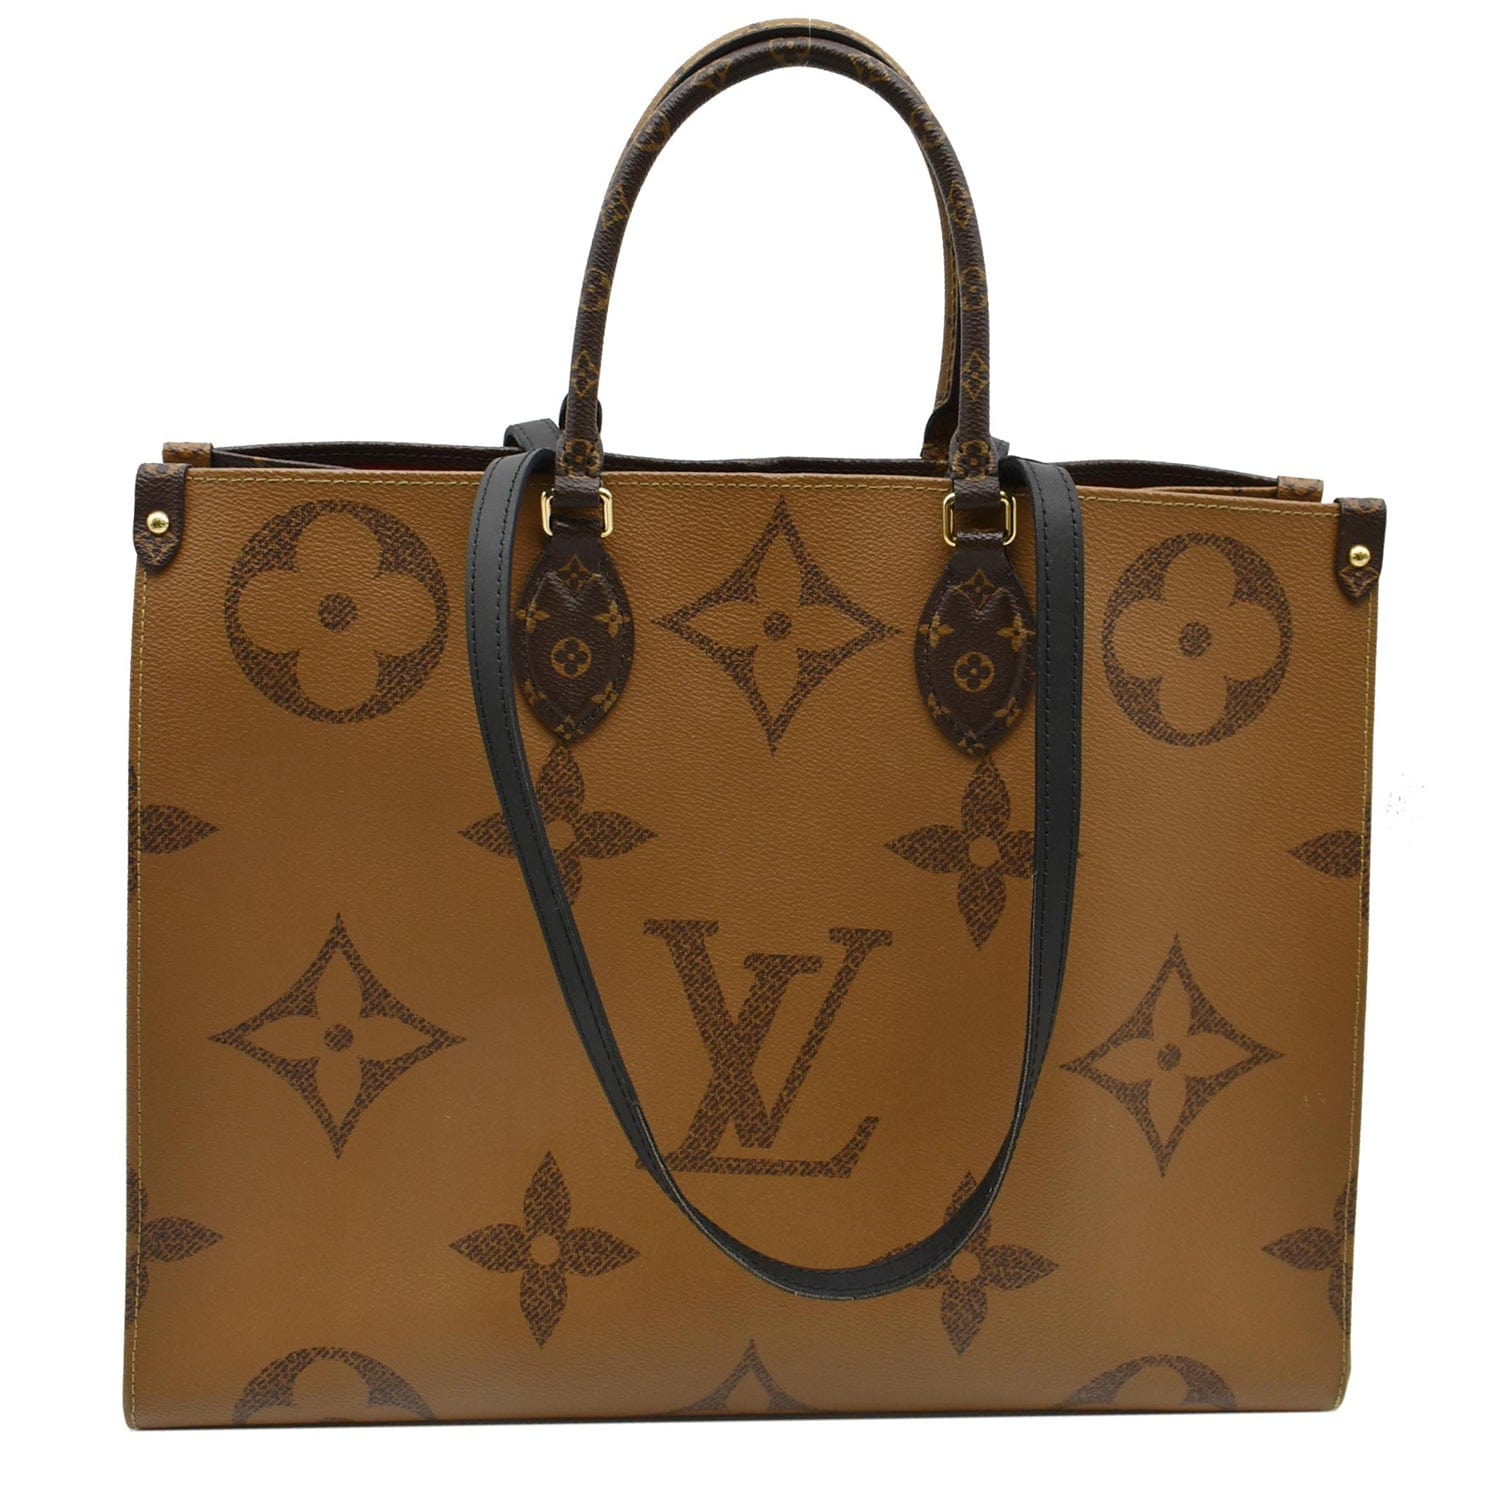 Sold at Auction: An excellent quality, Canvas handbag shaped like Loius  Vuitton Onthego Tote, with Louis Vuitton emblems and logos on the bag,  outer and inner handles, the bag is made of